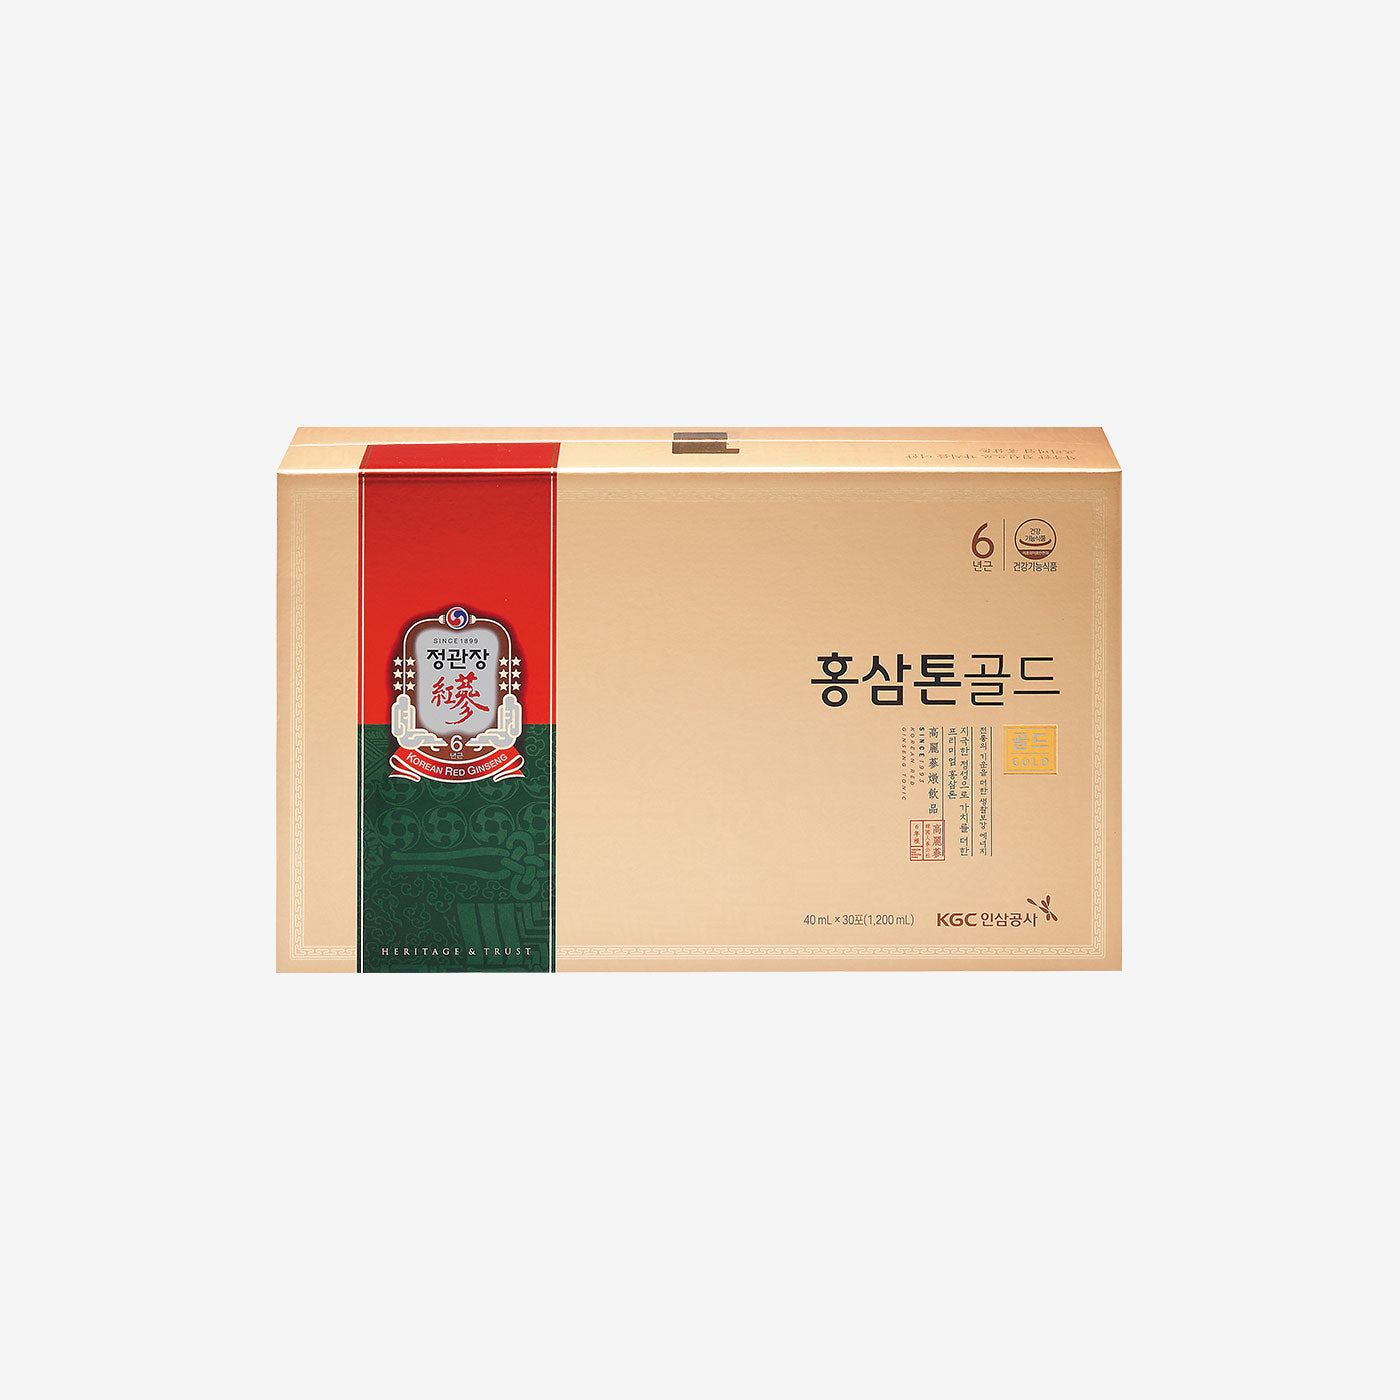 Korean Red Ginseng Tonic Gold Sets 40ml 30 bags pouches herbal extract 6 Years old drink